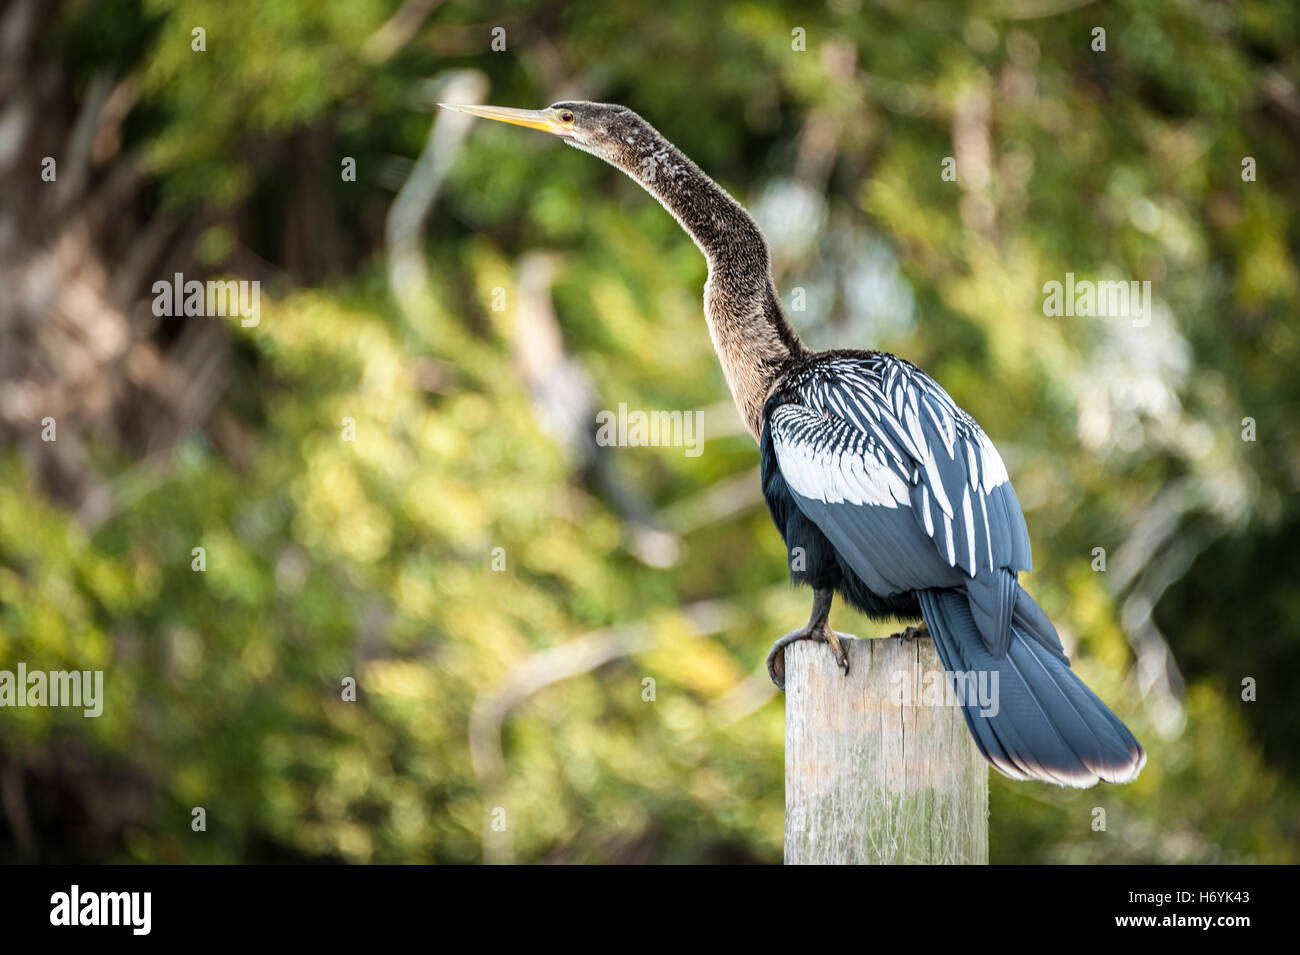 Anhinga (also known as water turkey or snake bird) perched on post at Bird Island Park in Ponte Vedra Beach, Florida, USA. Stock Photo